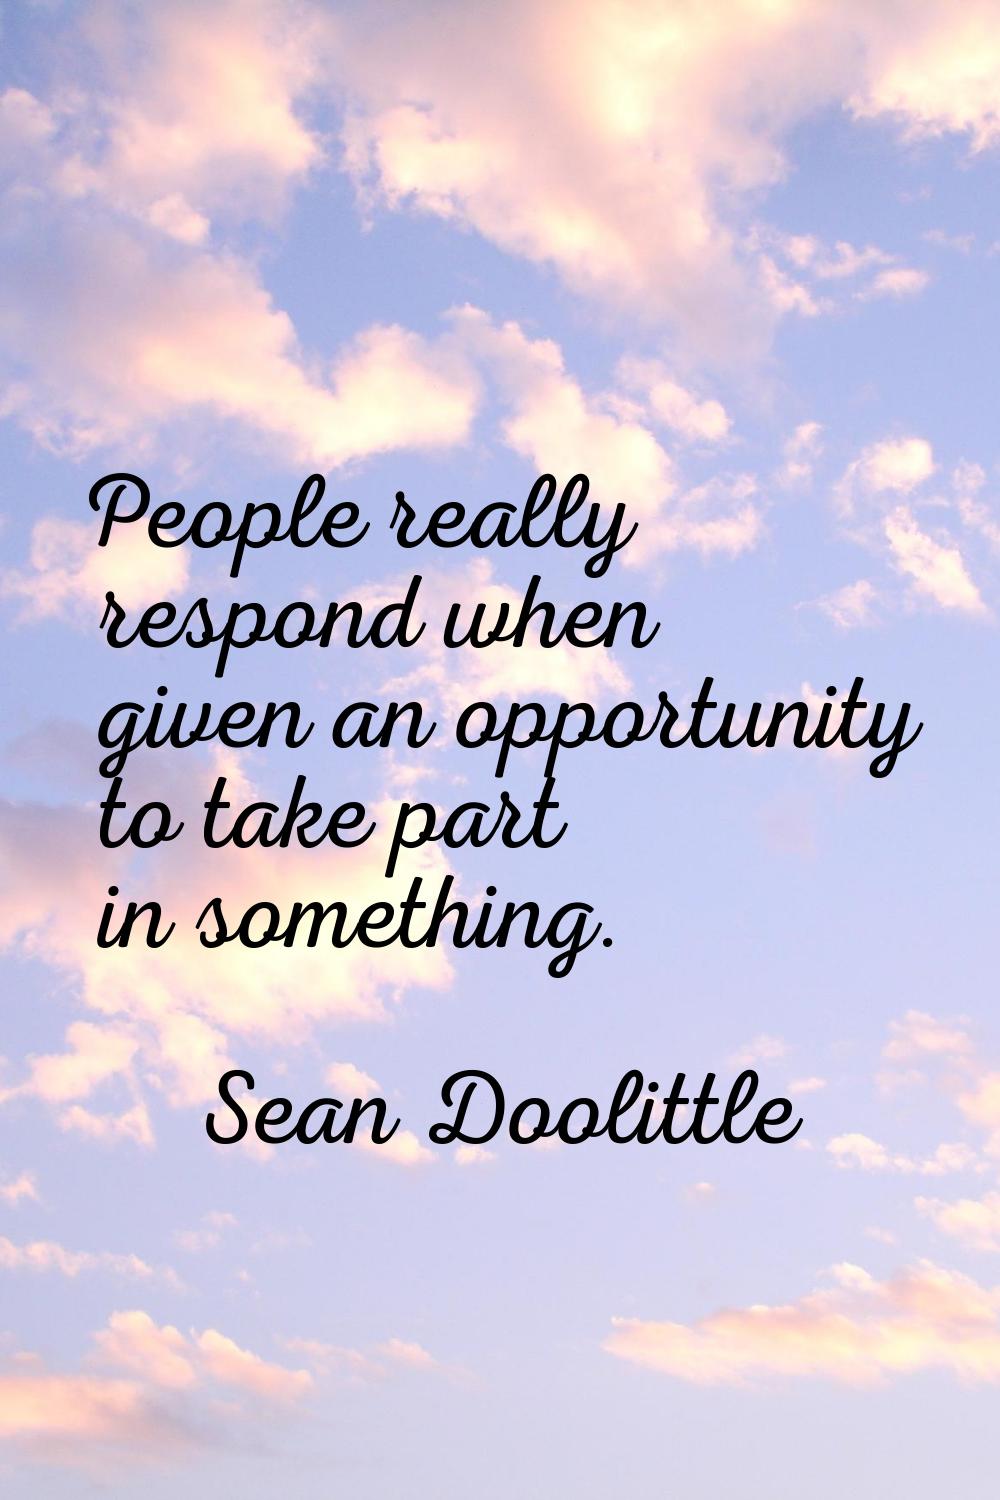 People really respond when given an opportunity to take part in something.